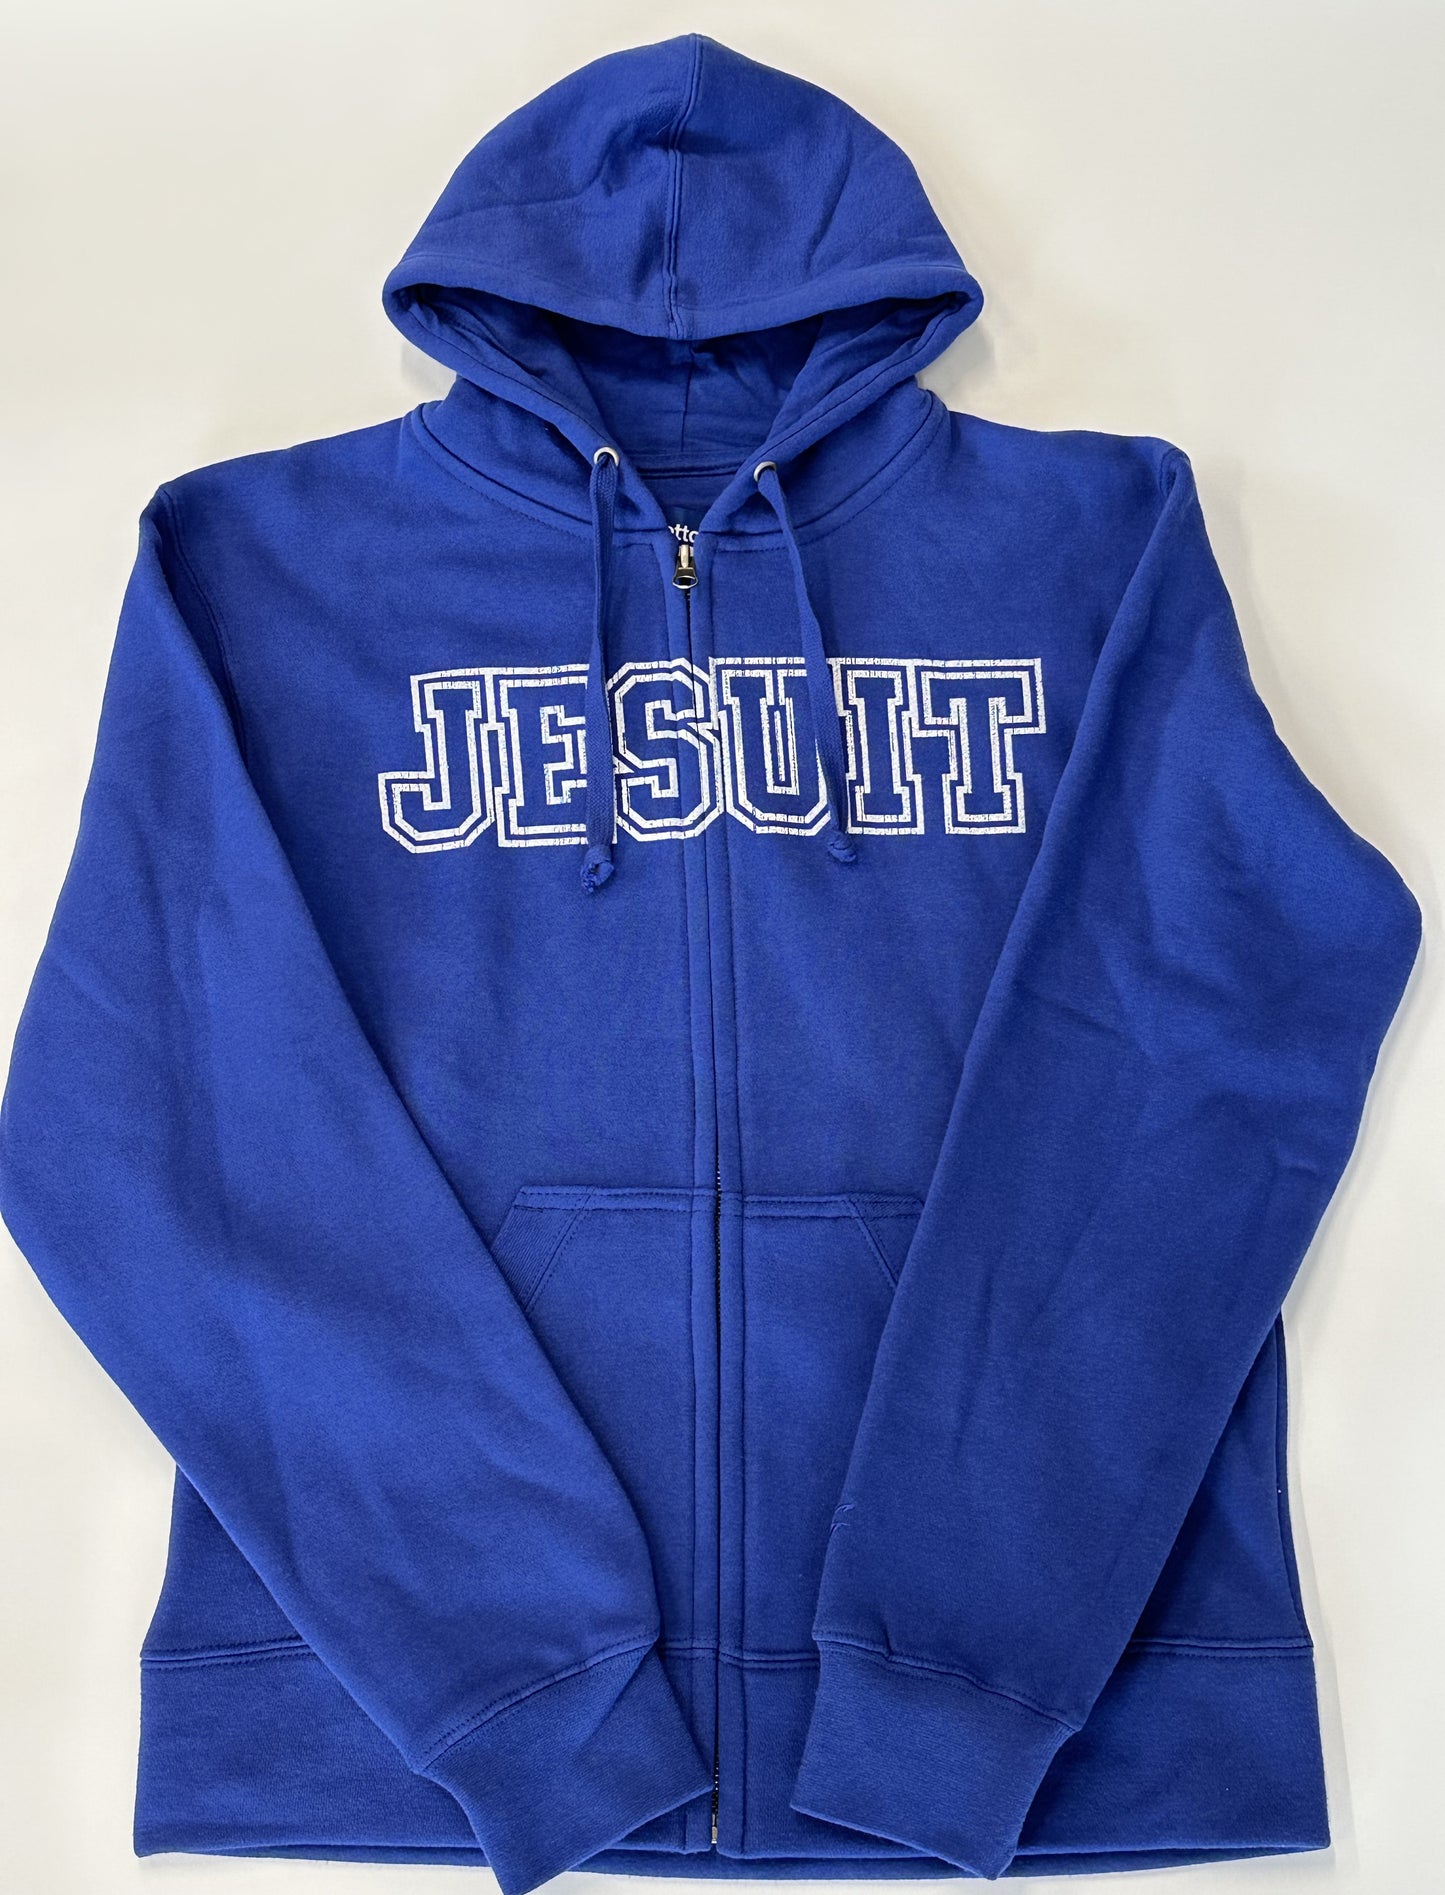 Gear for Sports.  80% Cotton/20% Polyester - 9 oz. fleece.  This full zip hoodie is brushed inside & out for the coziest fit & feel. Jersey lined hood with full covered zipper & pouch pockets. 1 x 1 Cotton/Spandex rib at cuff & pocket openings.